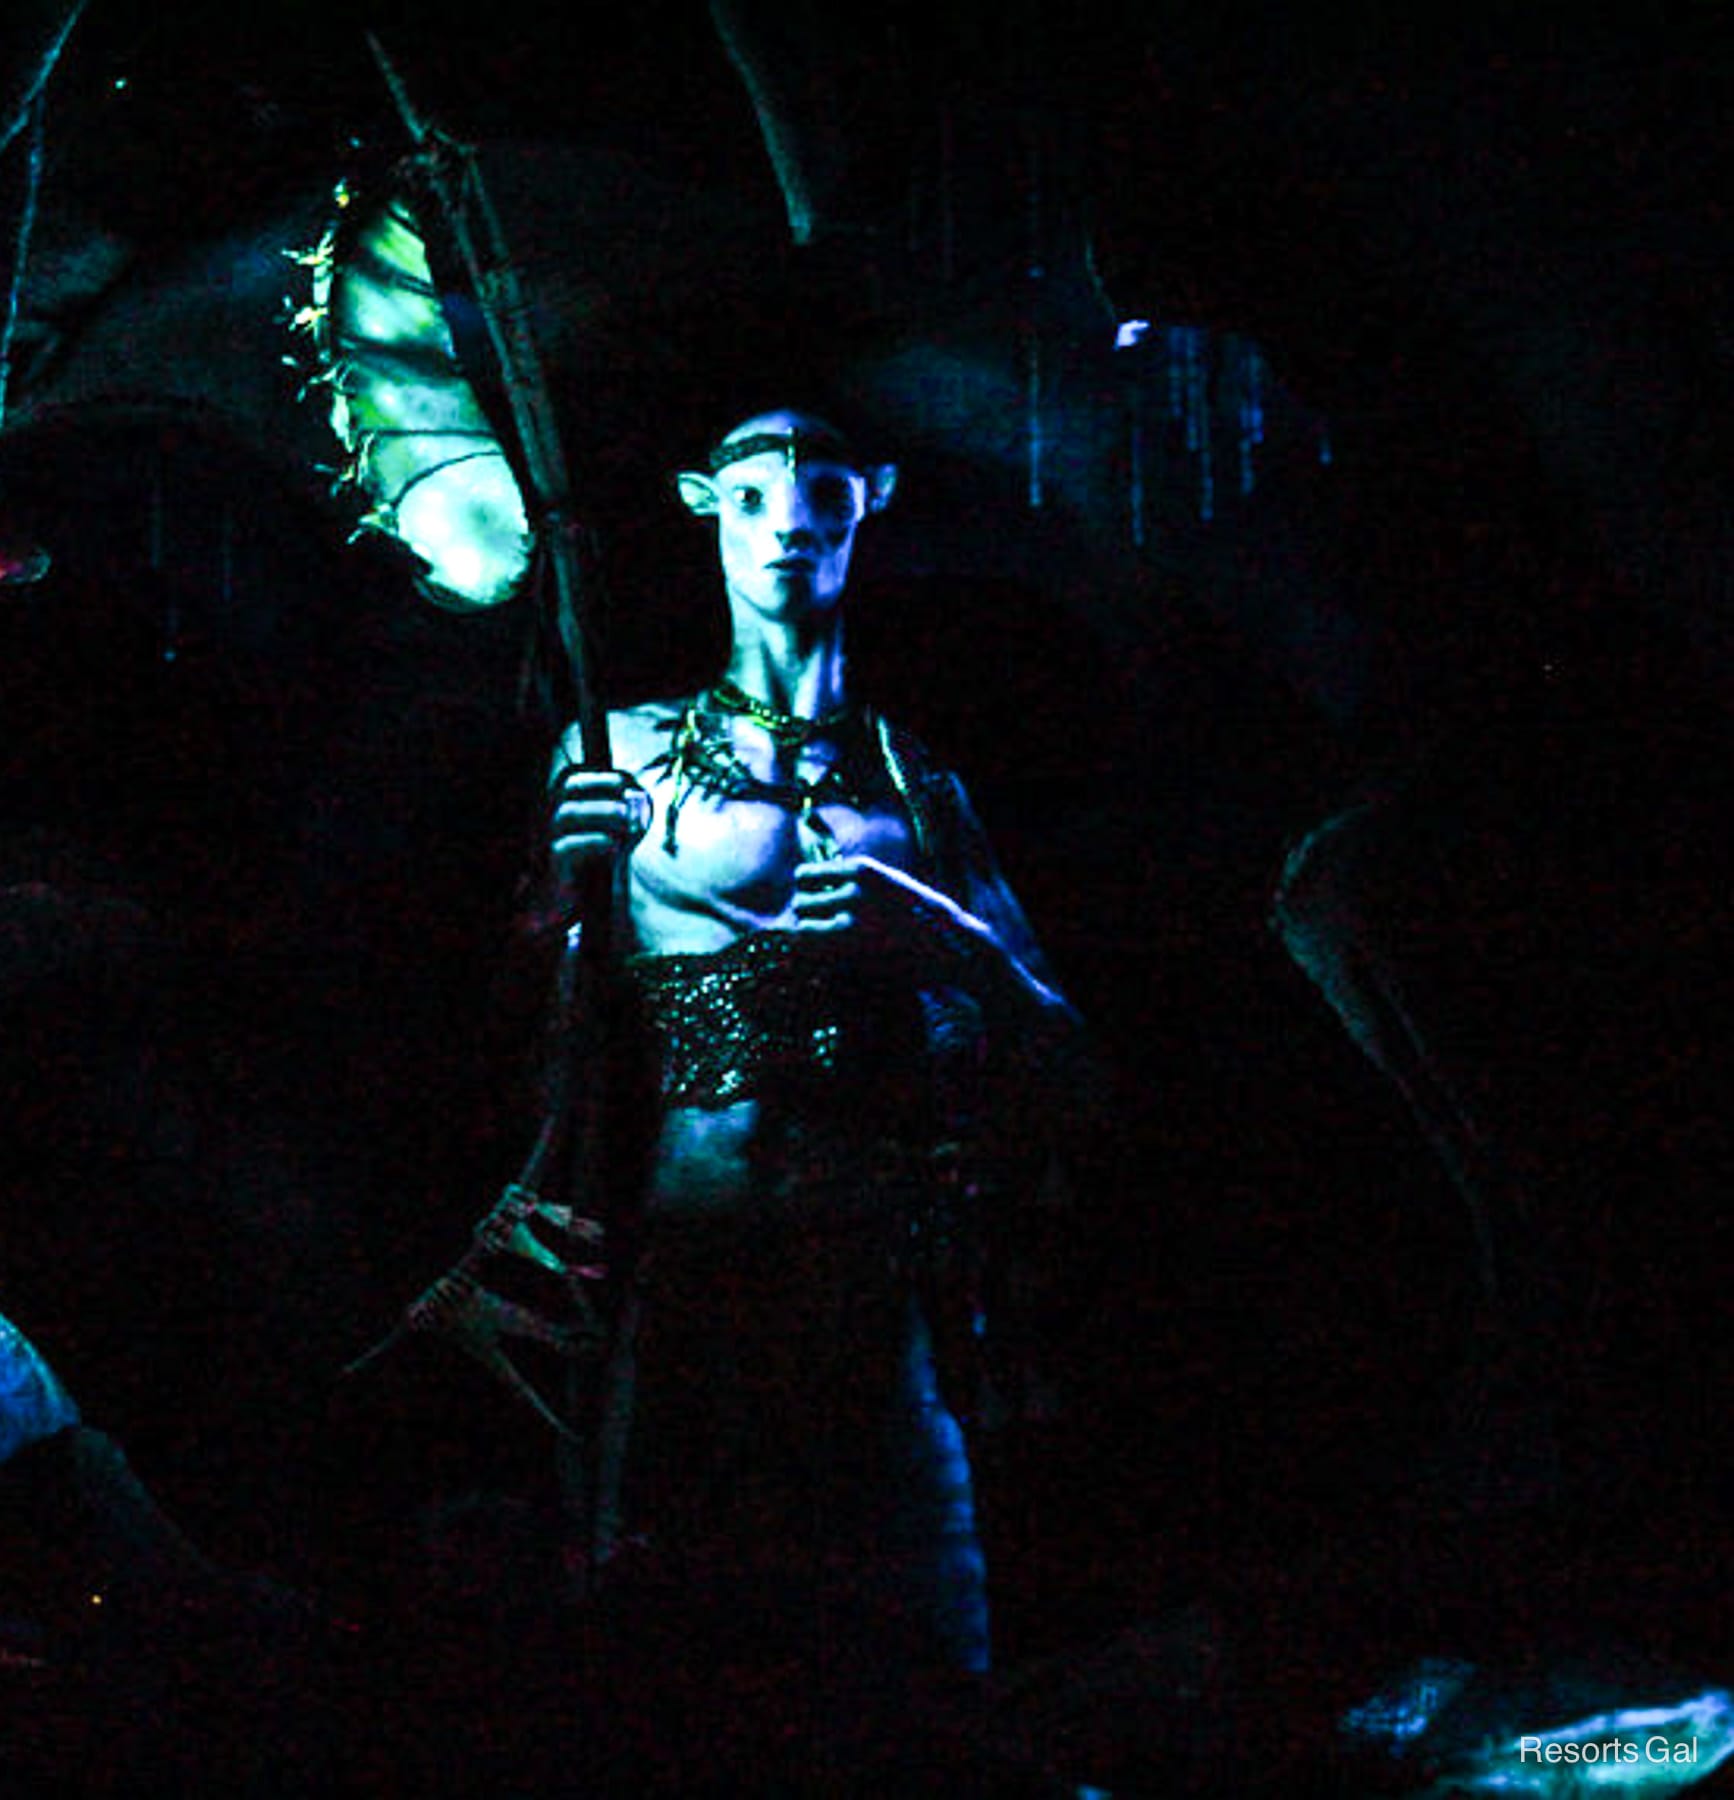 a Na'vi person projected on a ride 